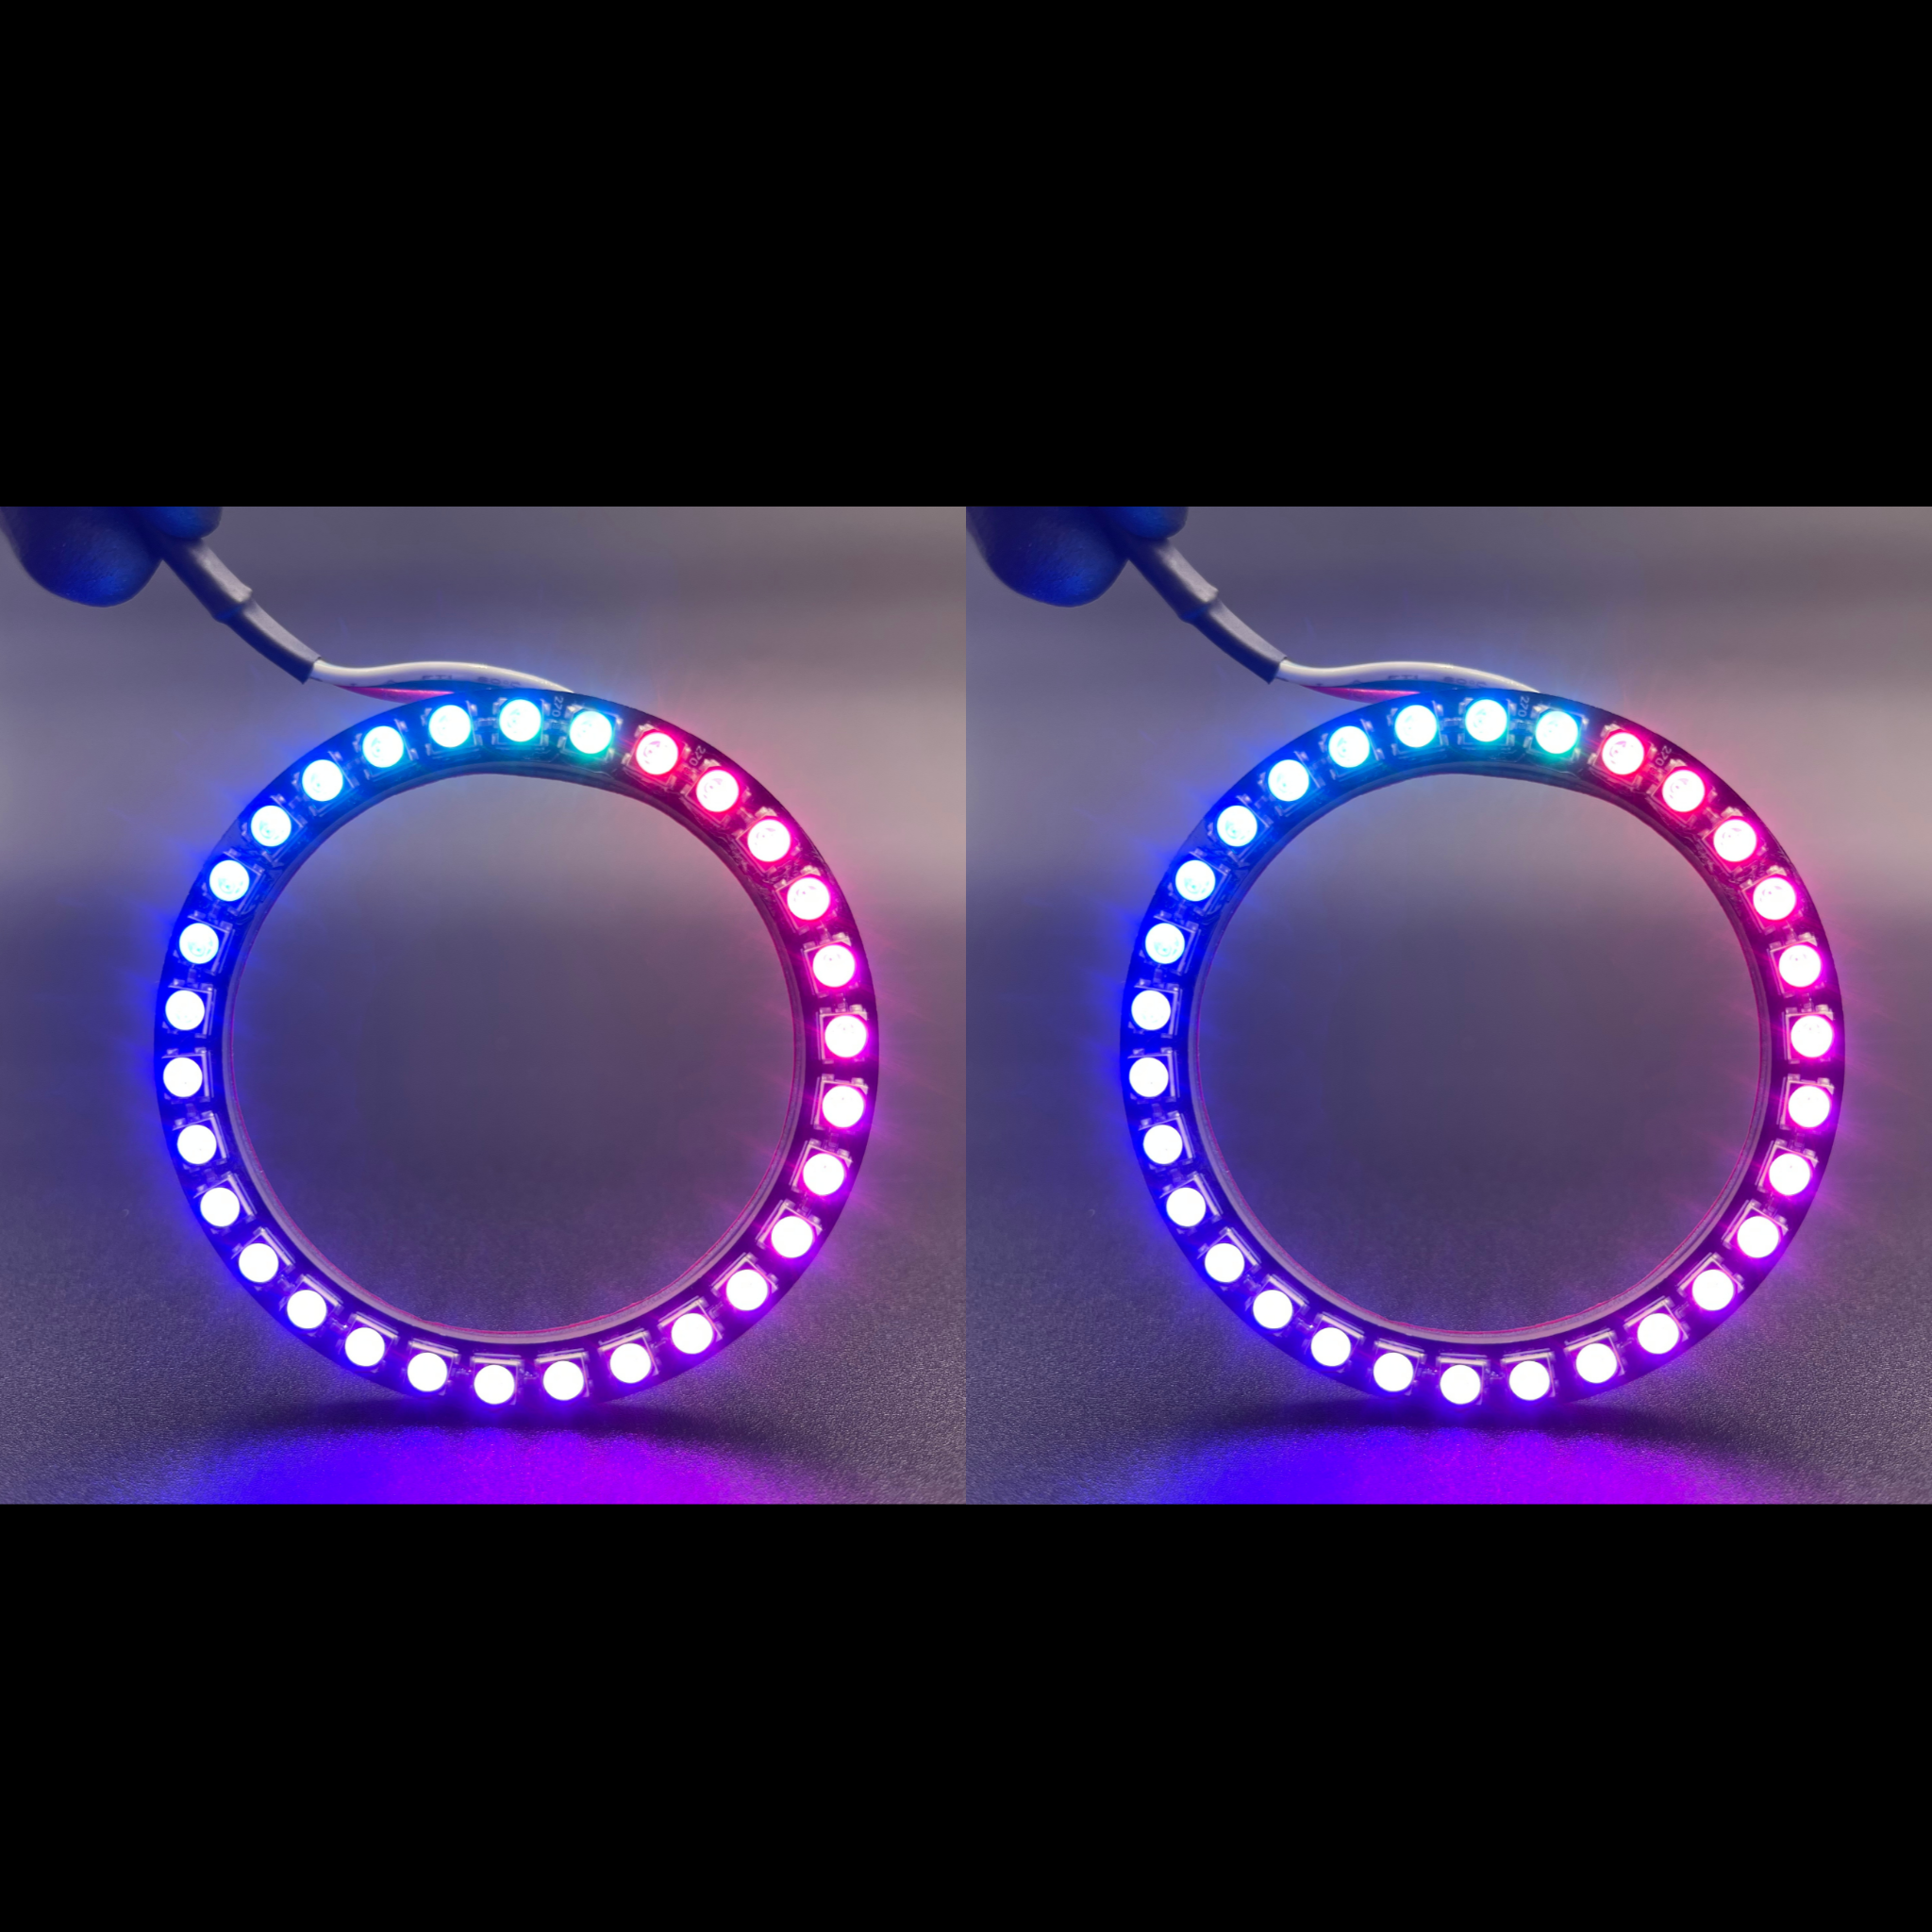 1987-1993 Ford Mustang Multicolor Halo Kit - RGB Halo Kits Multicolor Flow Series Color Chasing RGBWA LED headlight kit Oracle Lighting Trendz OneUpLighting Morimoto theretrofitsource AutoLEDTech Diode Dynamics